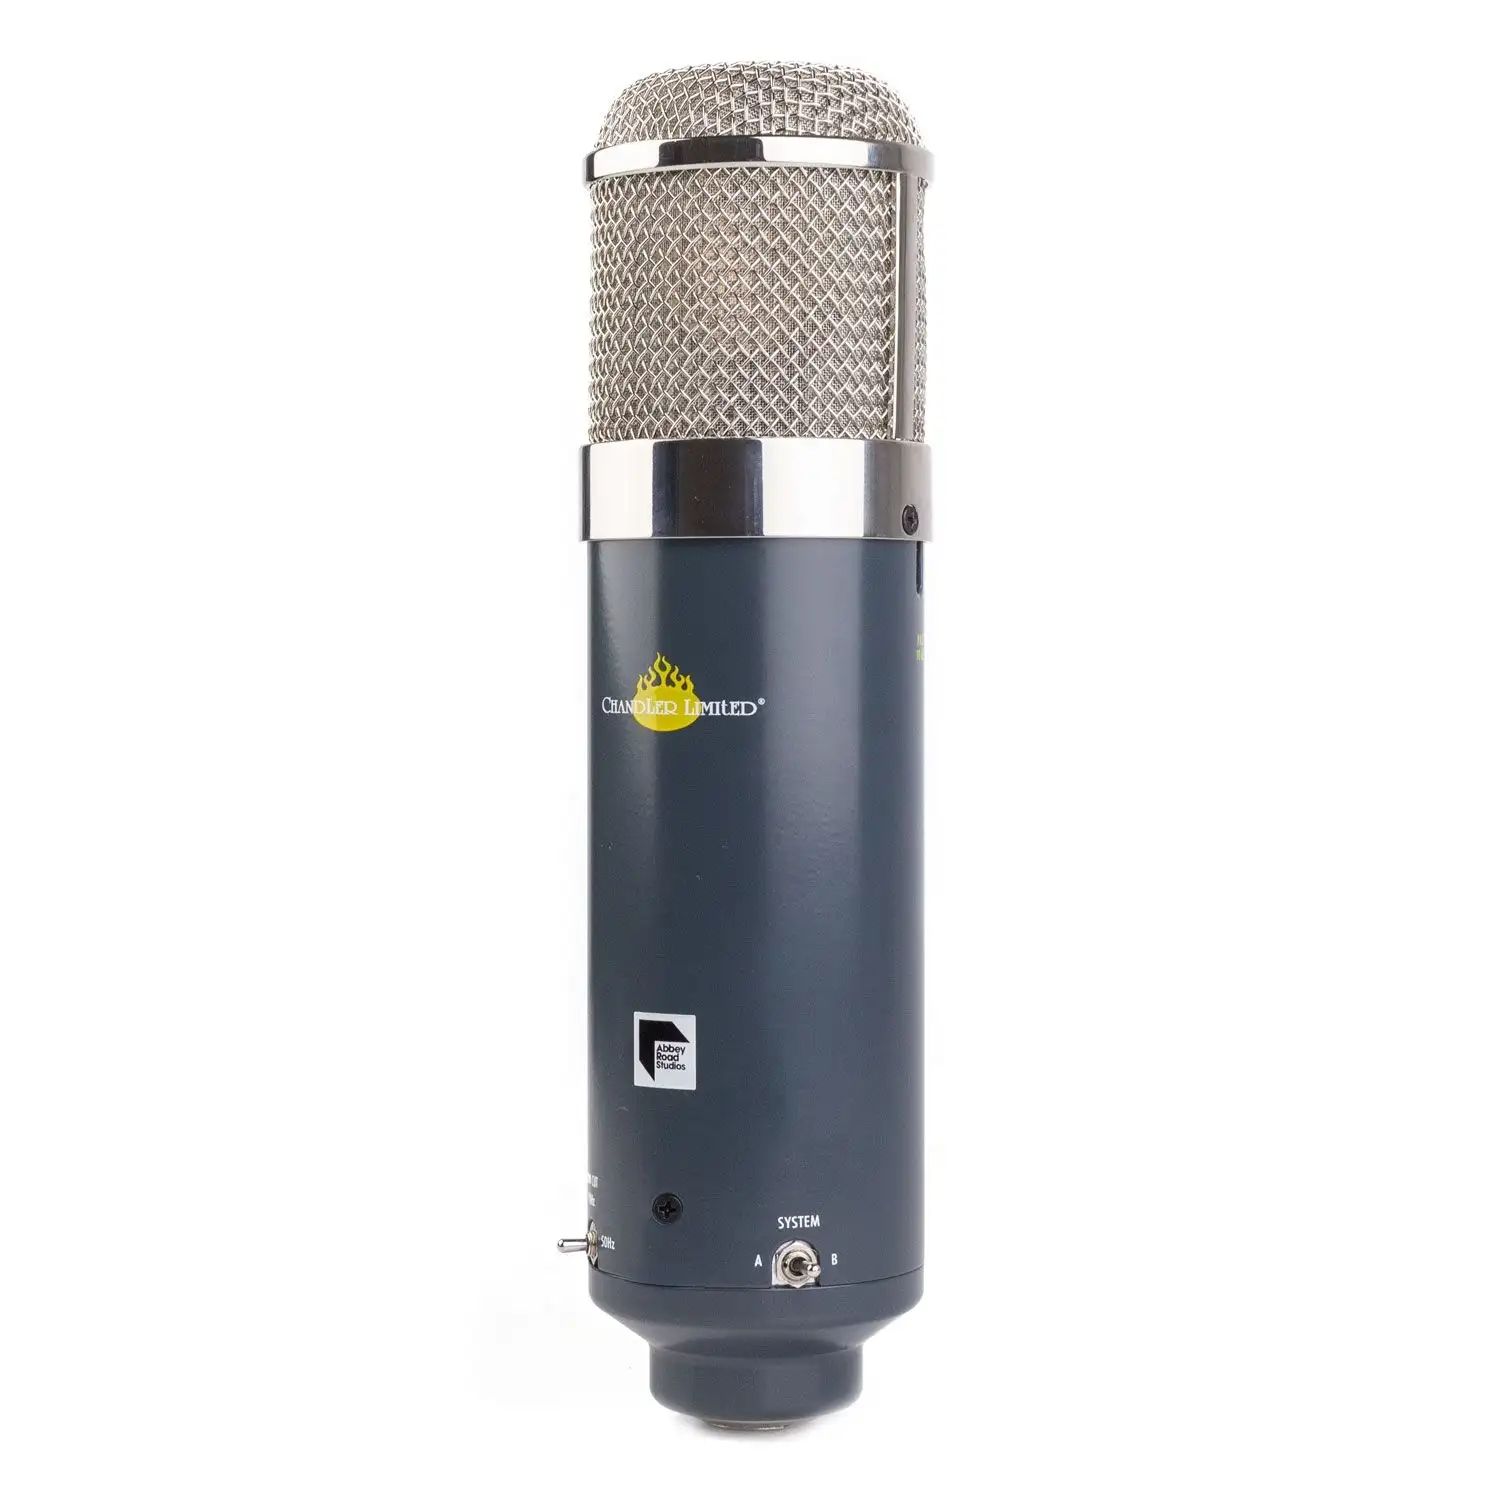 Chandler Limited TG MICROPHONE по цене 241 080 ₽